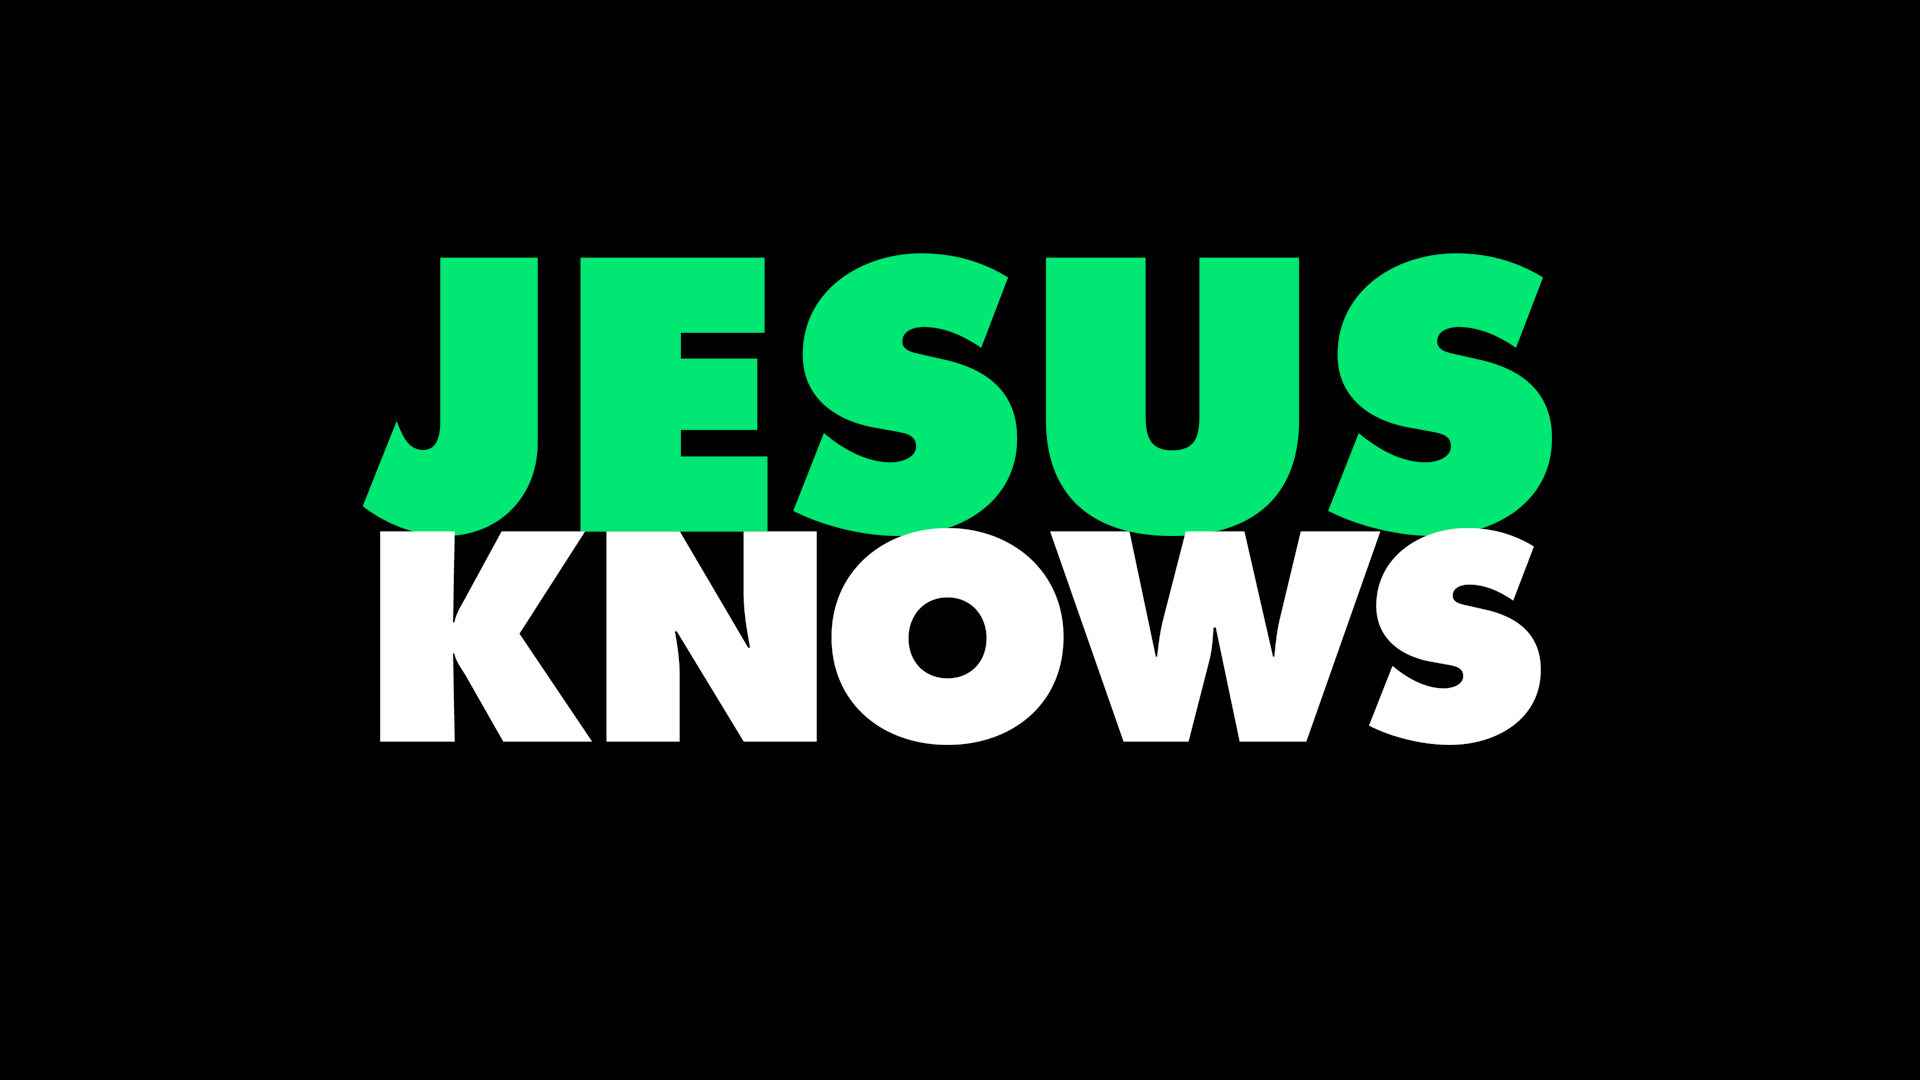 He Knows – In God's Image